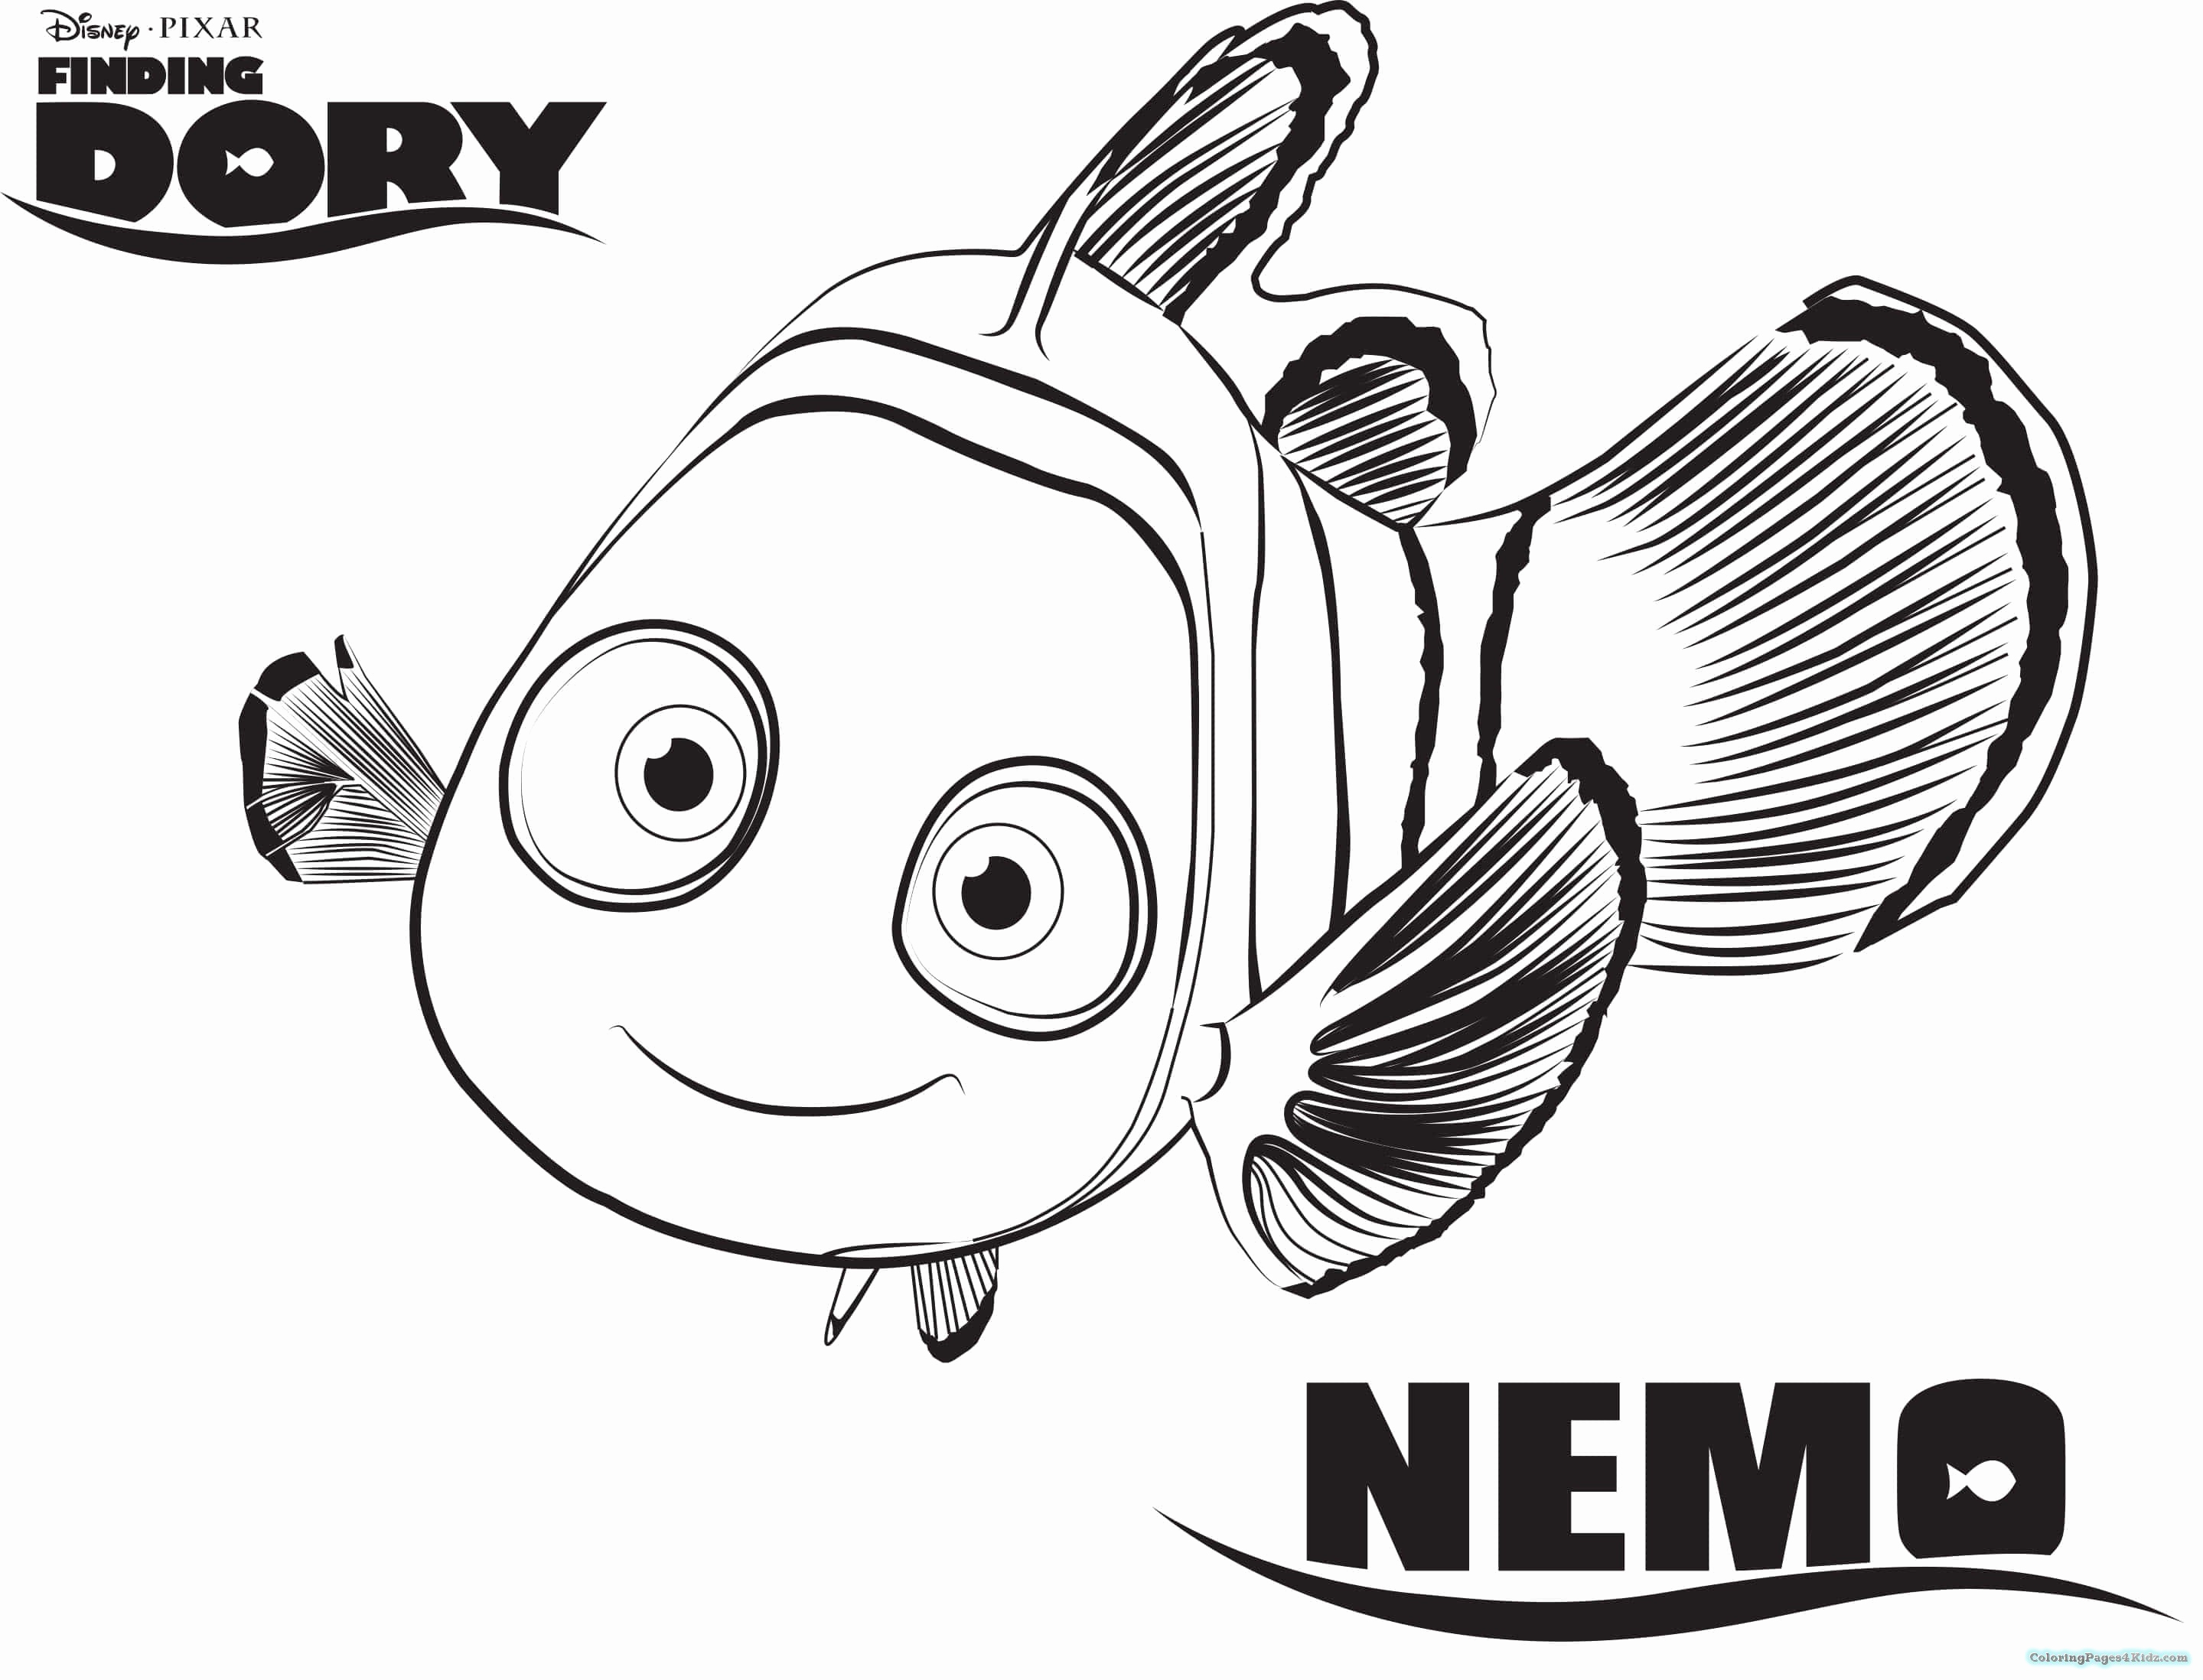 Finding Nemo Characters Coloring Pages Coloring Ideas Finding Dory Color Pages Beautiful Nemo Coloring